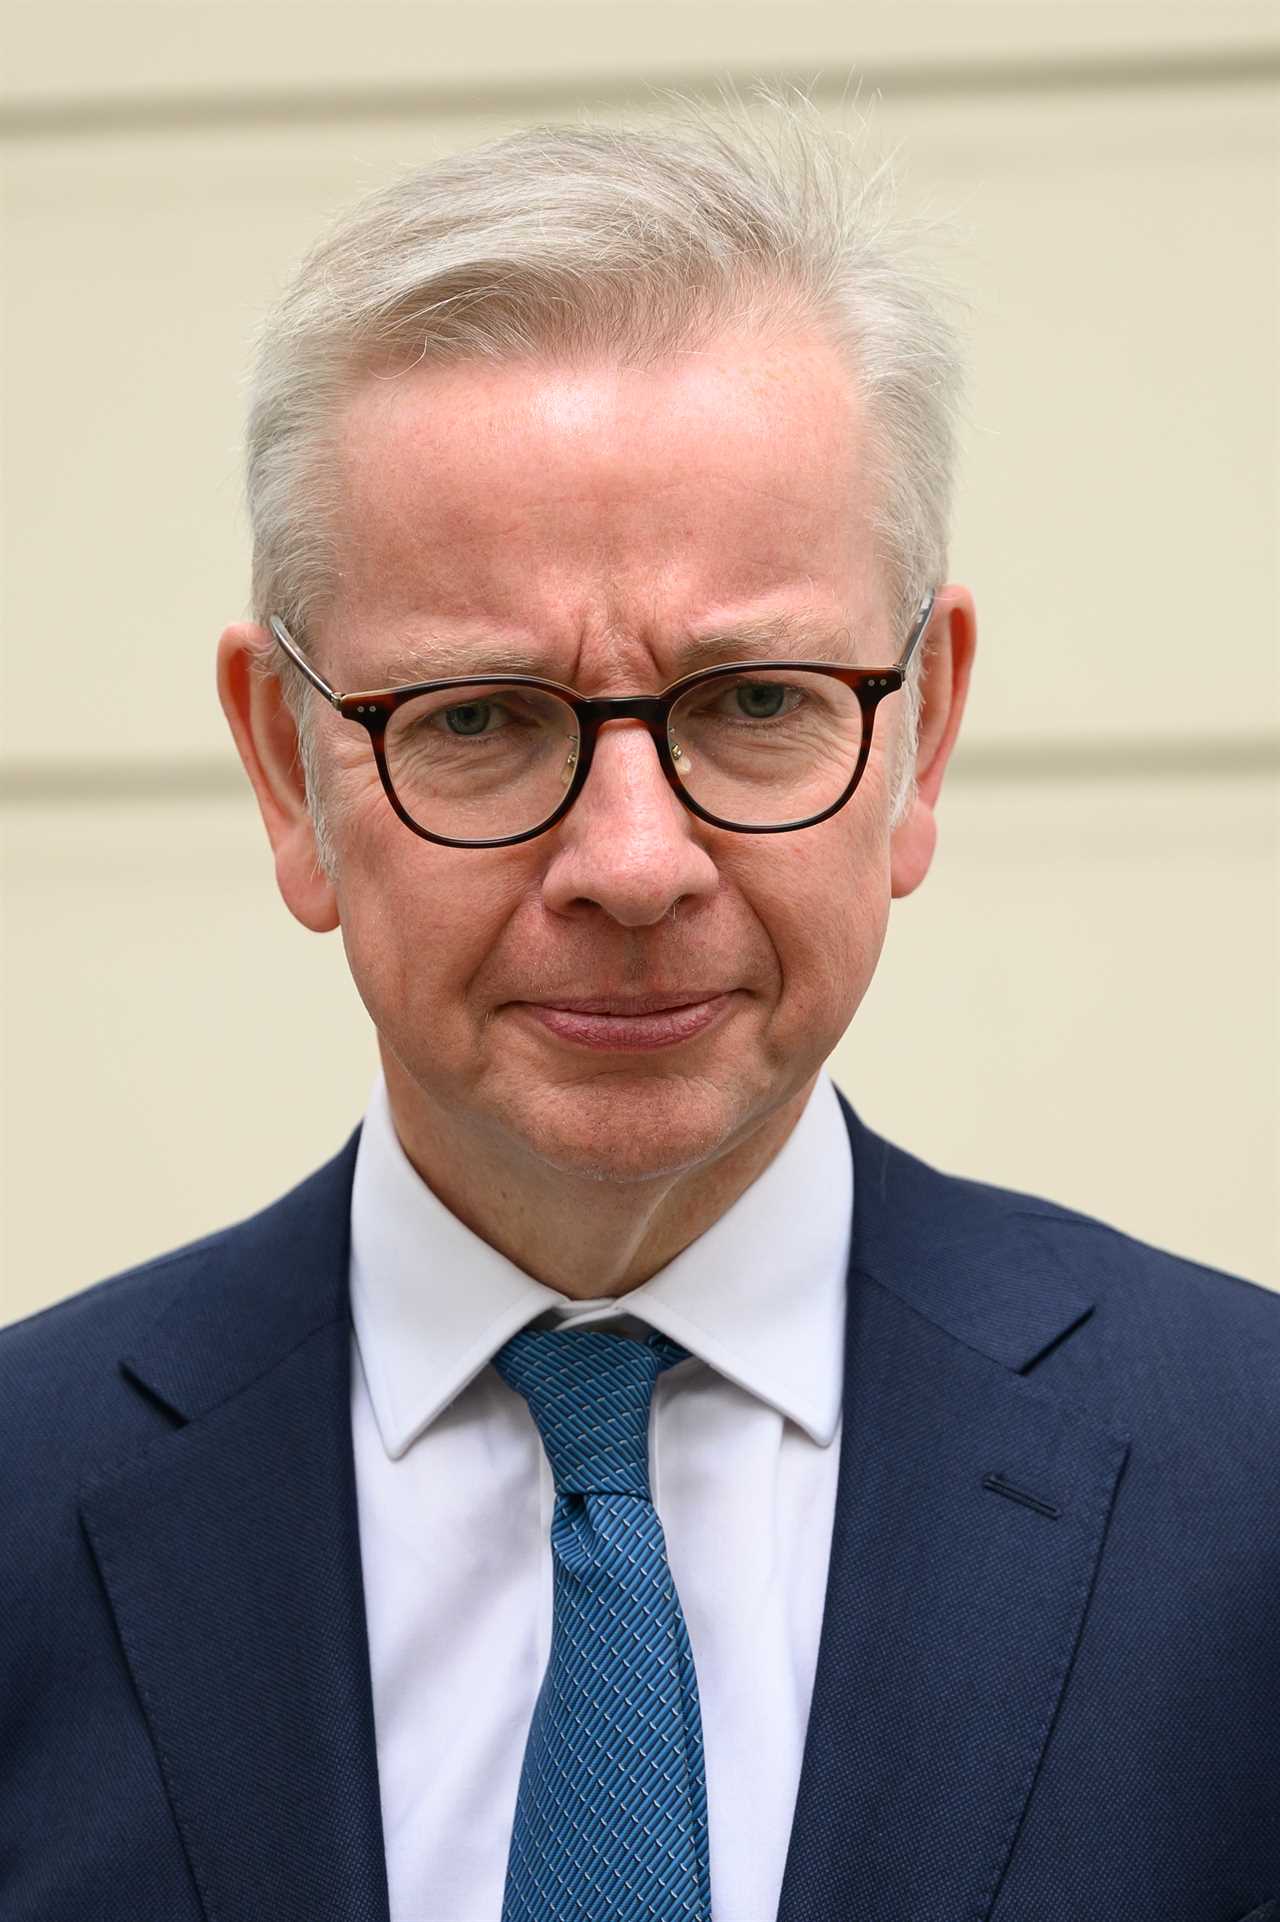 Empty shops & offices set to be turned into housing under new plans unveiled by Michael Gove